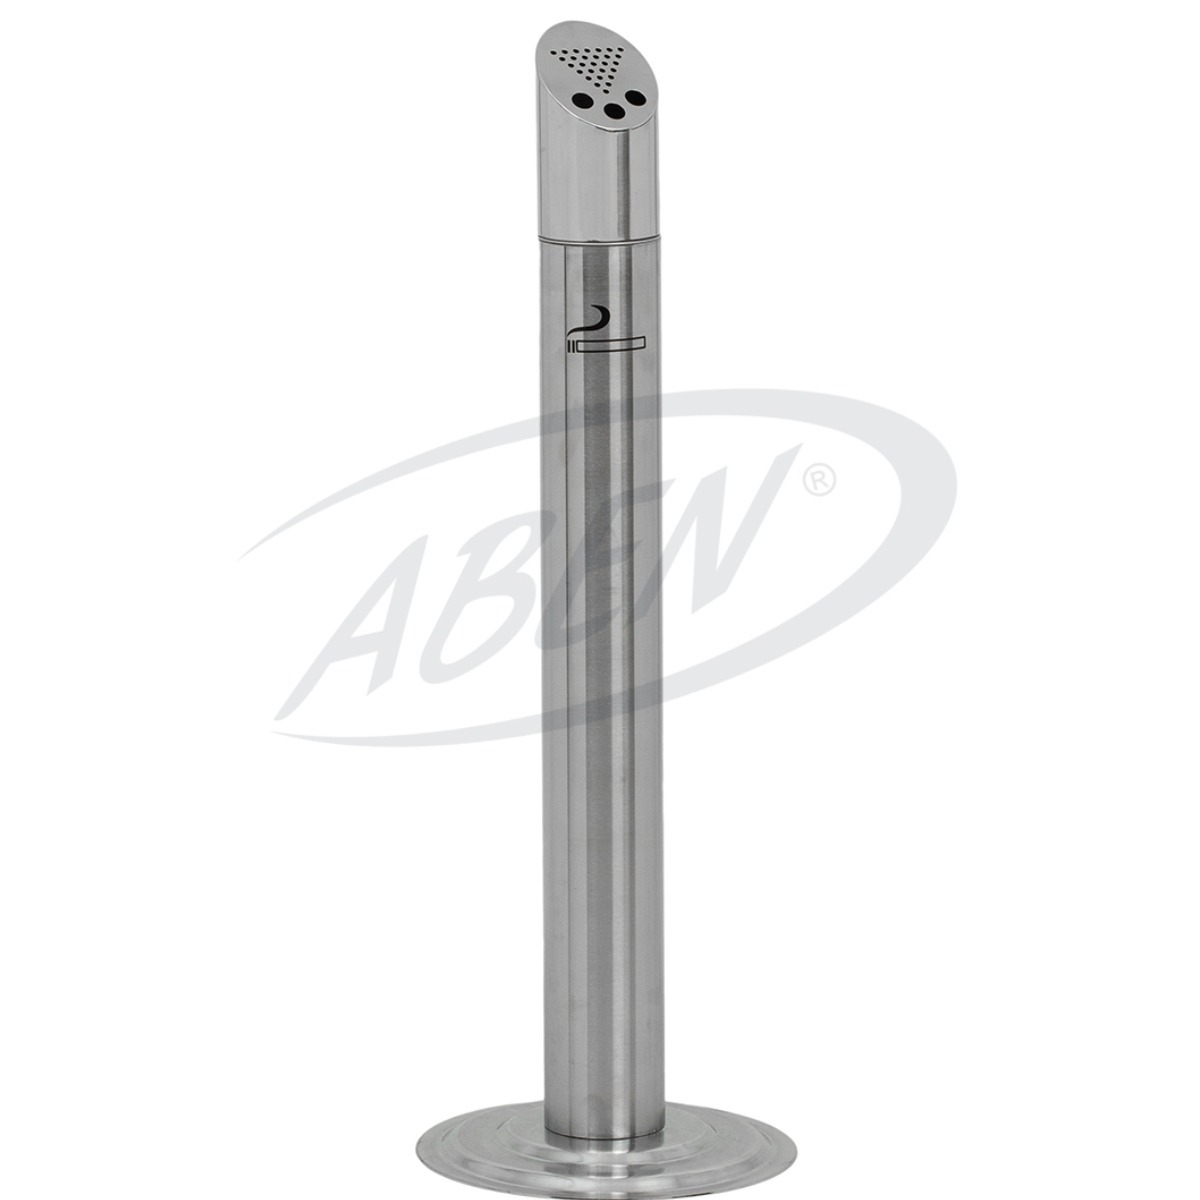 AB-102 Outdoor Ashtray Stainless